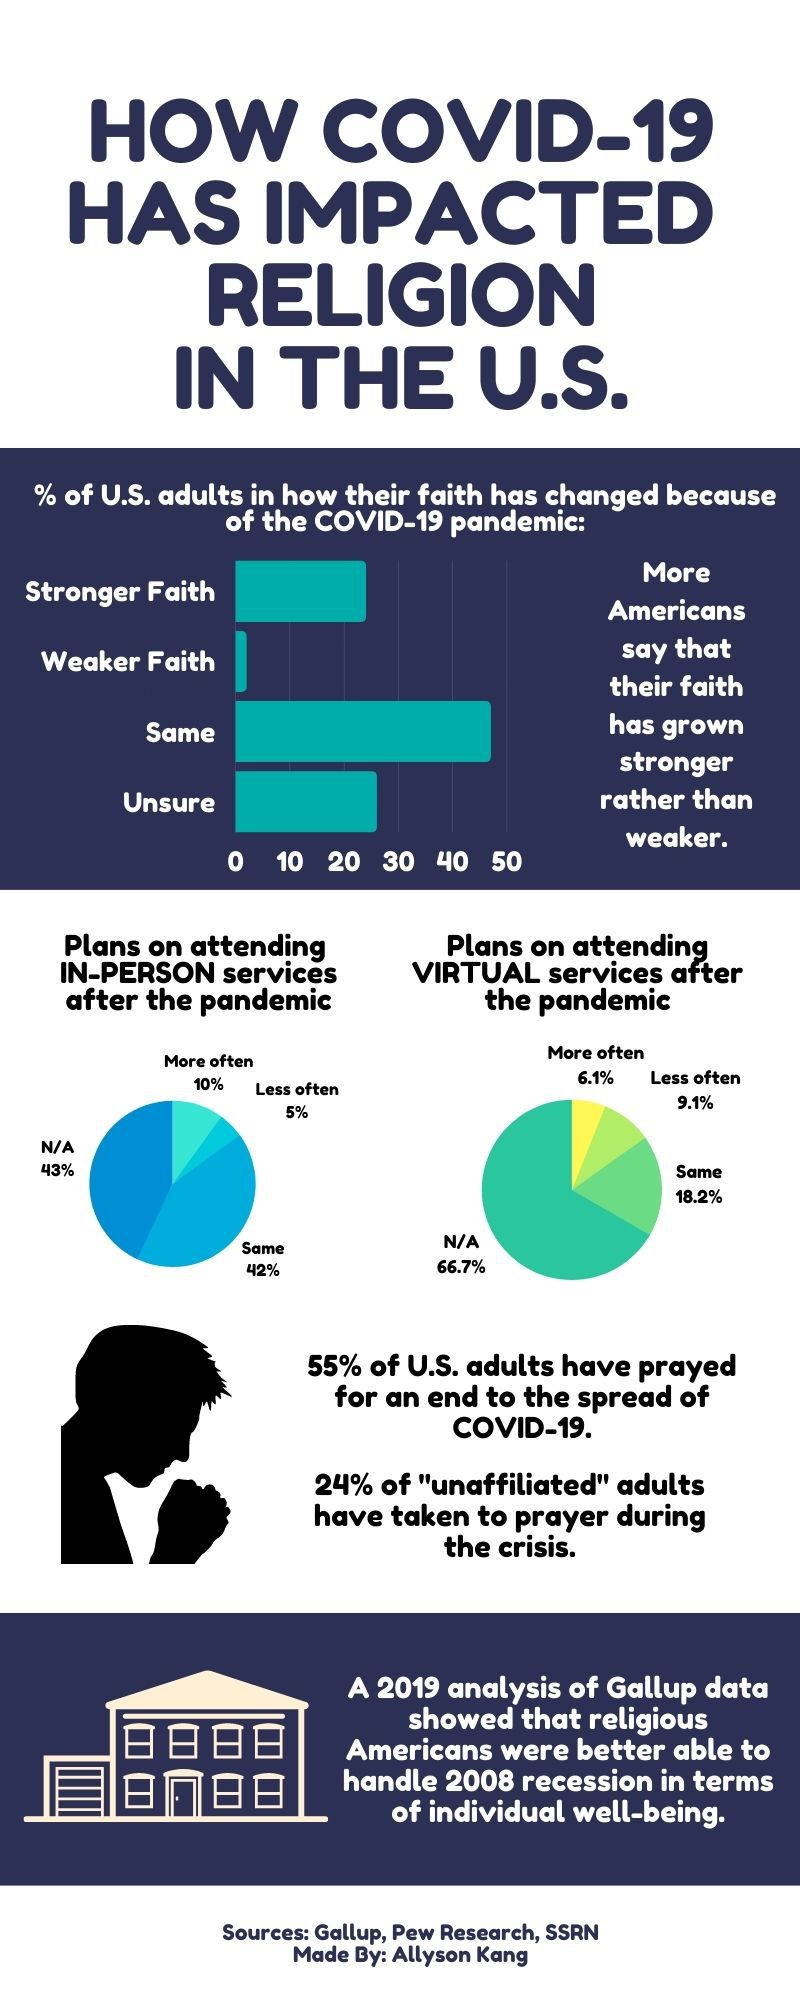 Infographic on how religion has changed since COVID: In general, Americans report that their religious faith has grown stronger or stayed the same since the pandemic. 55% of Americans have prayed for an end to coronavirus and 24% of unaffiliated adults have started praying since the pandemic. A 2019 analysis of Gallup data showed that religious Americans were better able to handle the 2008 recession in terms of individual well being.